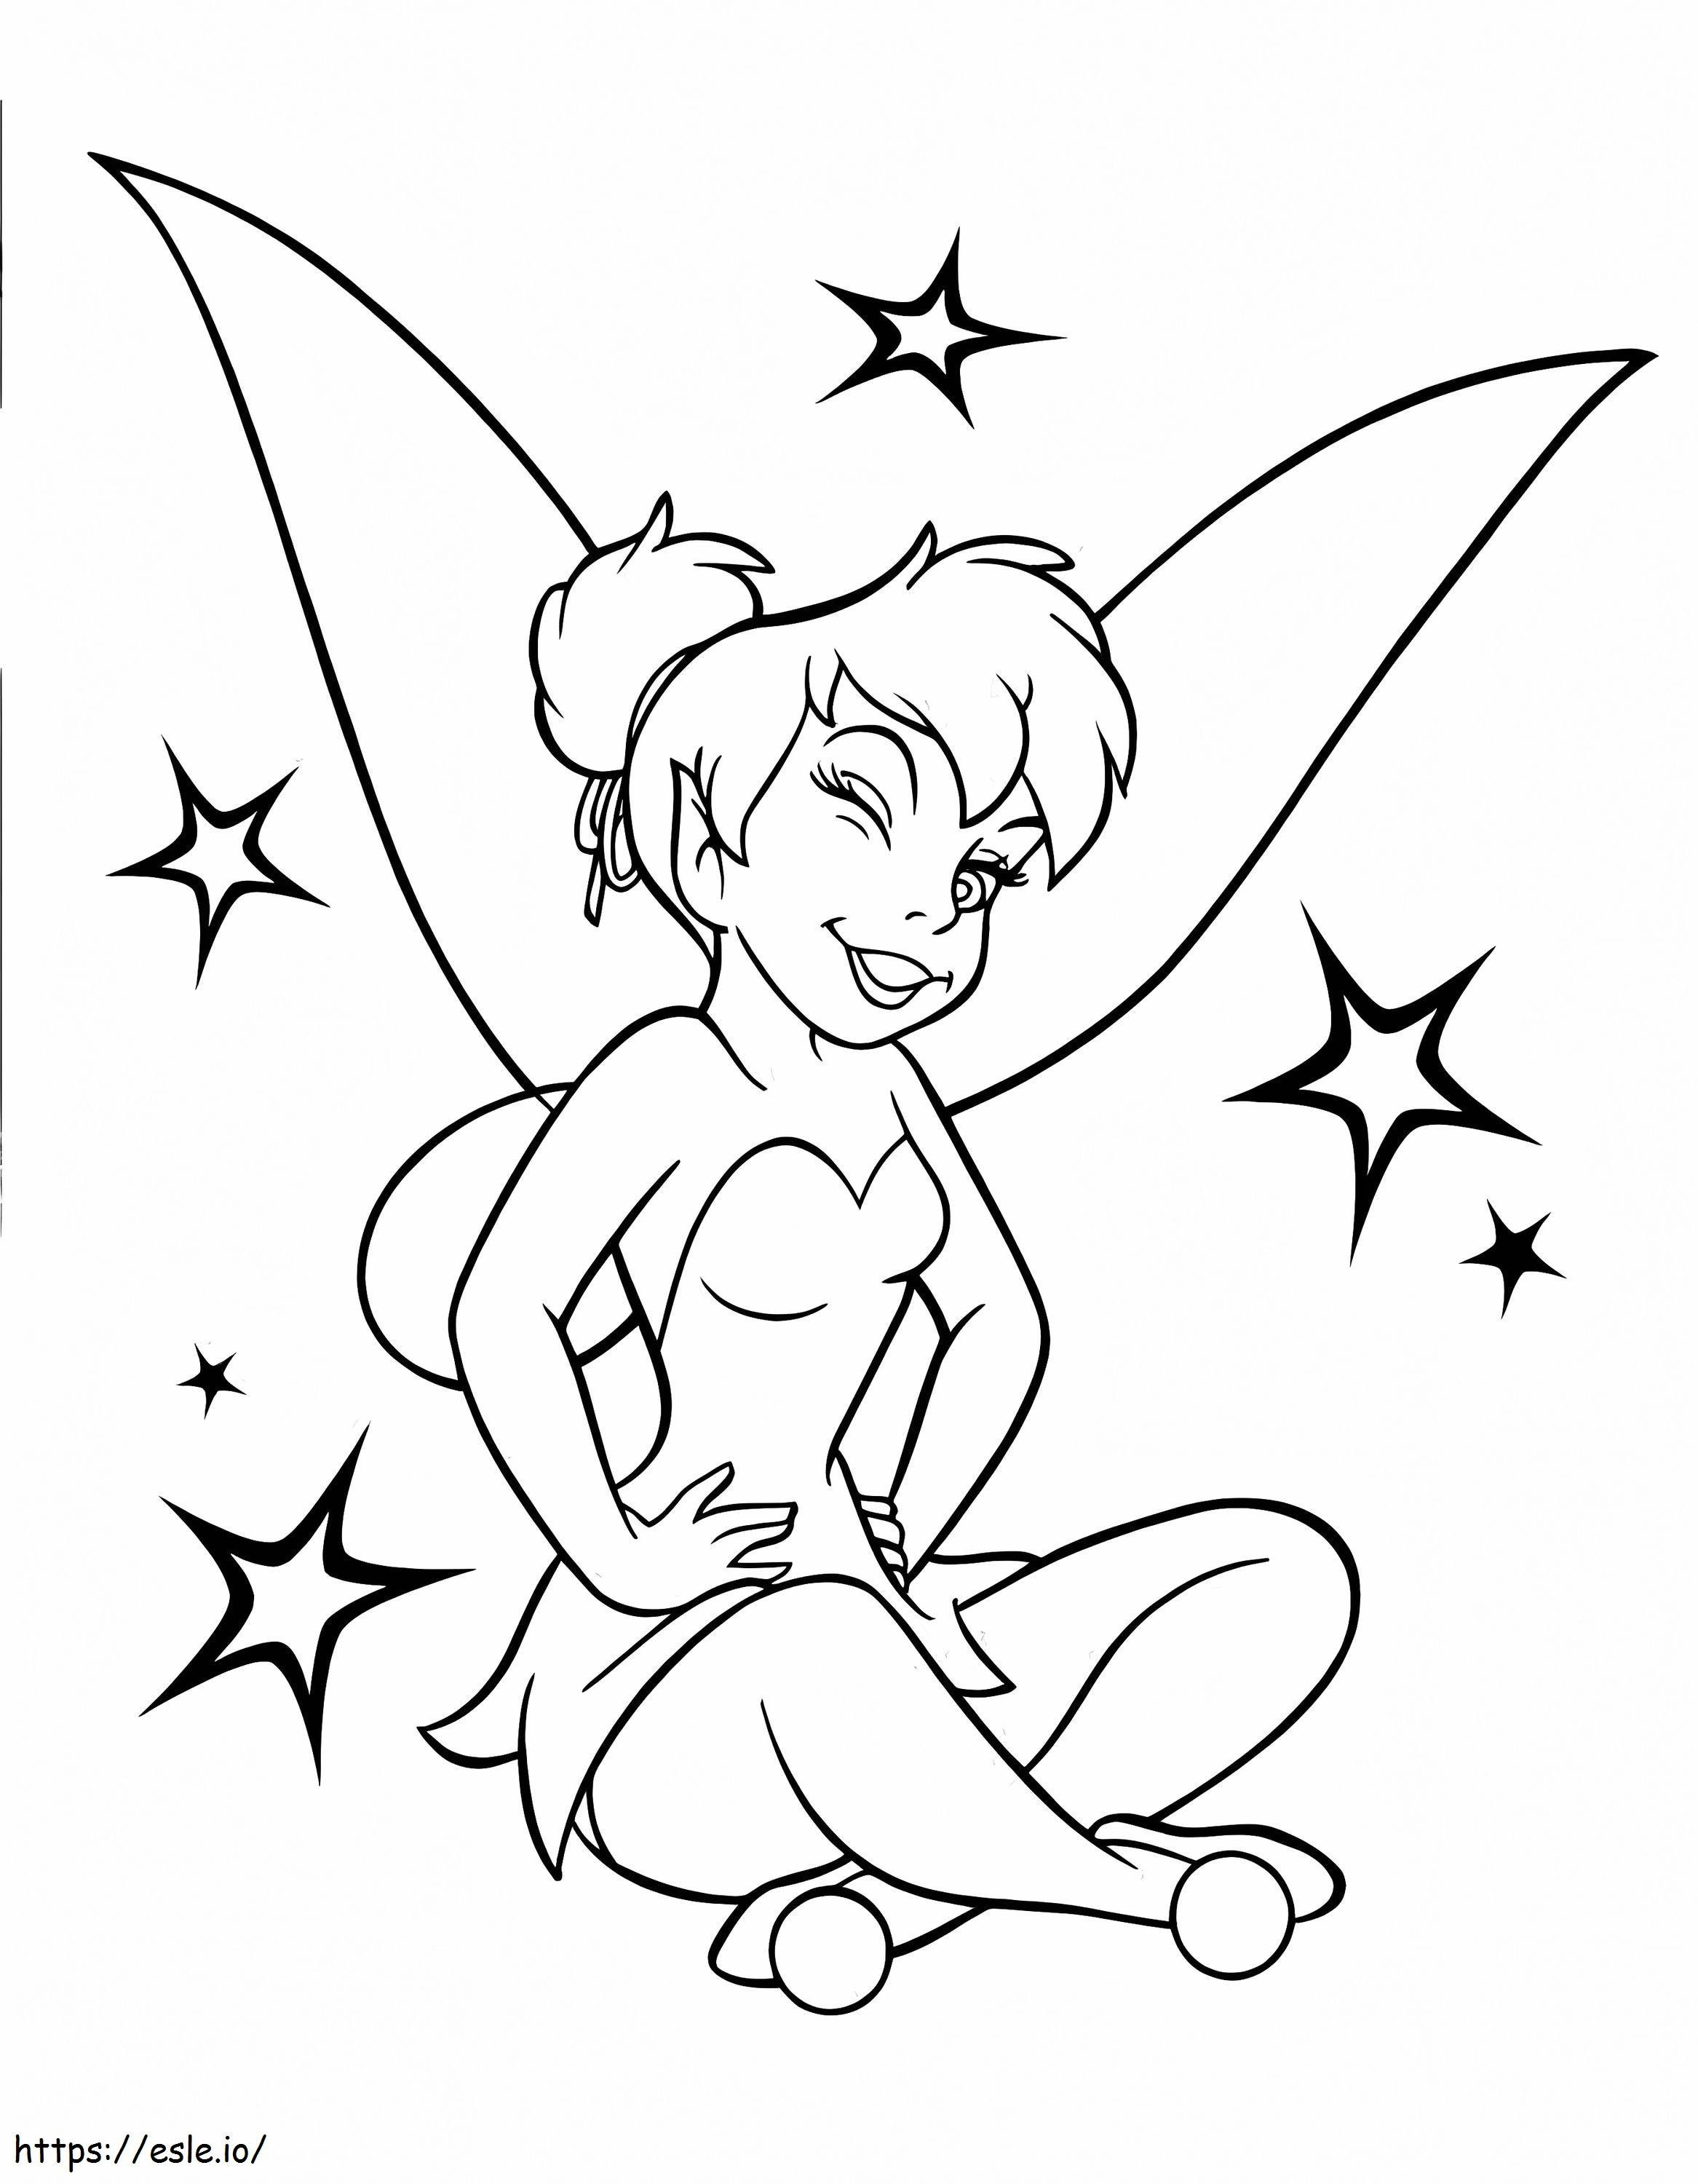 Happy Sitting Tinkerbell coloring page